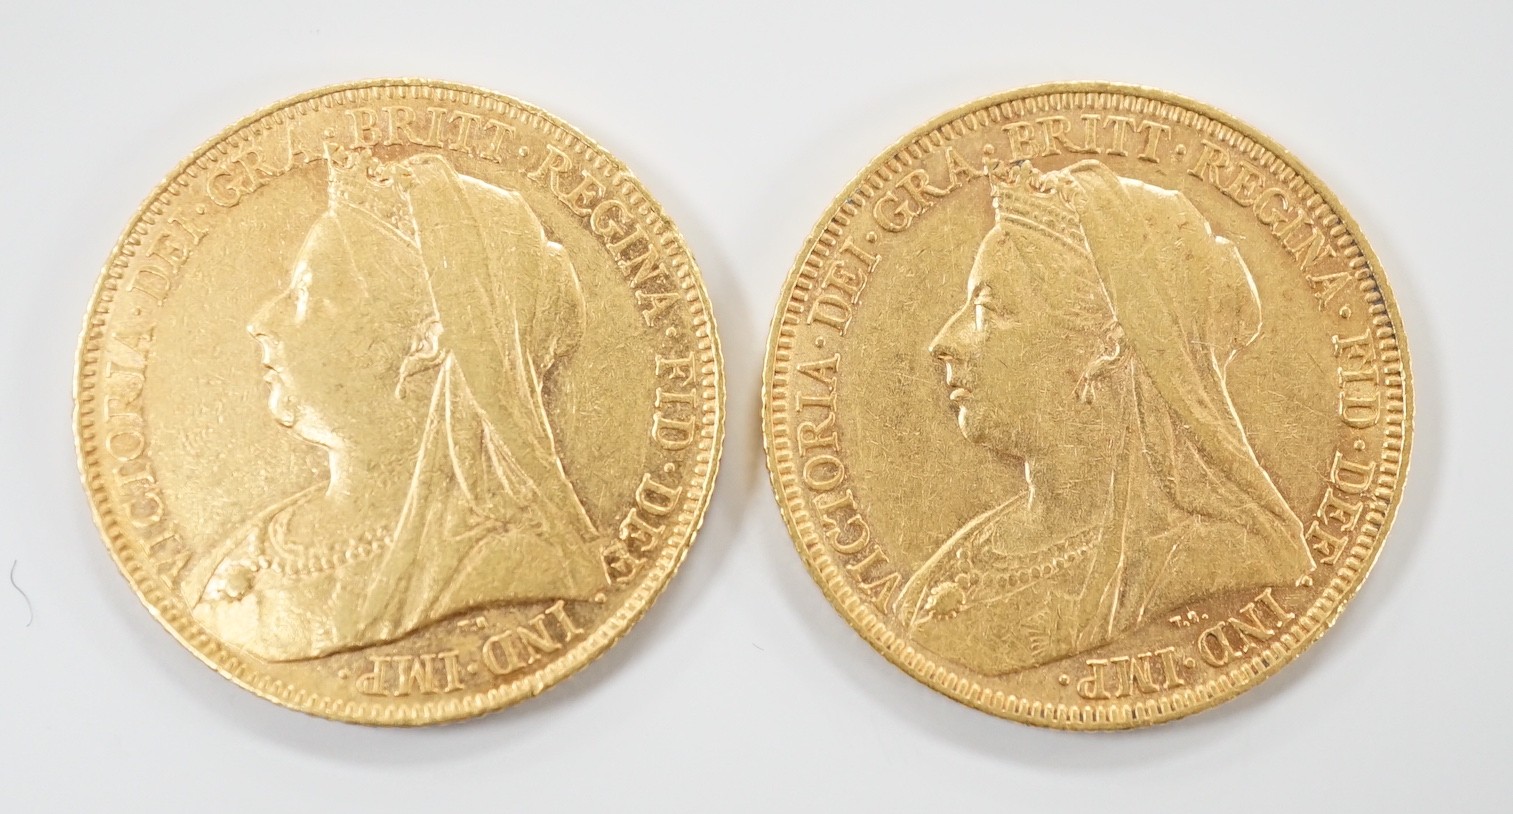 Two Victoria gold sovereigns, 1895 & 1899.